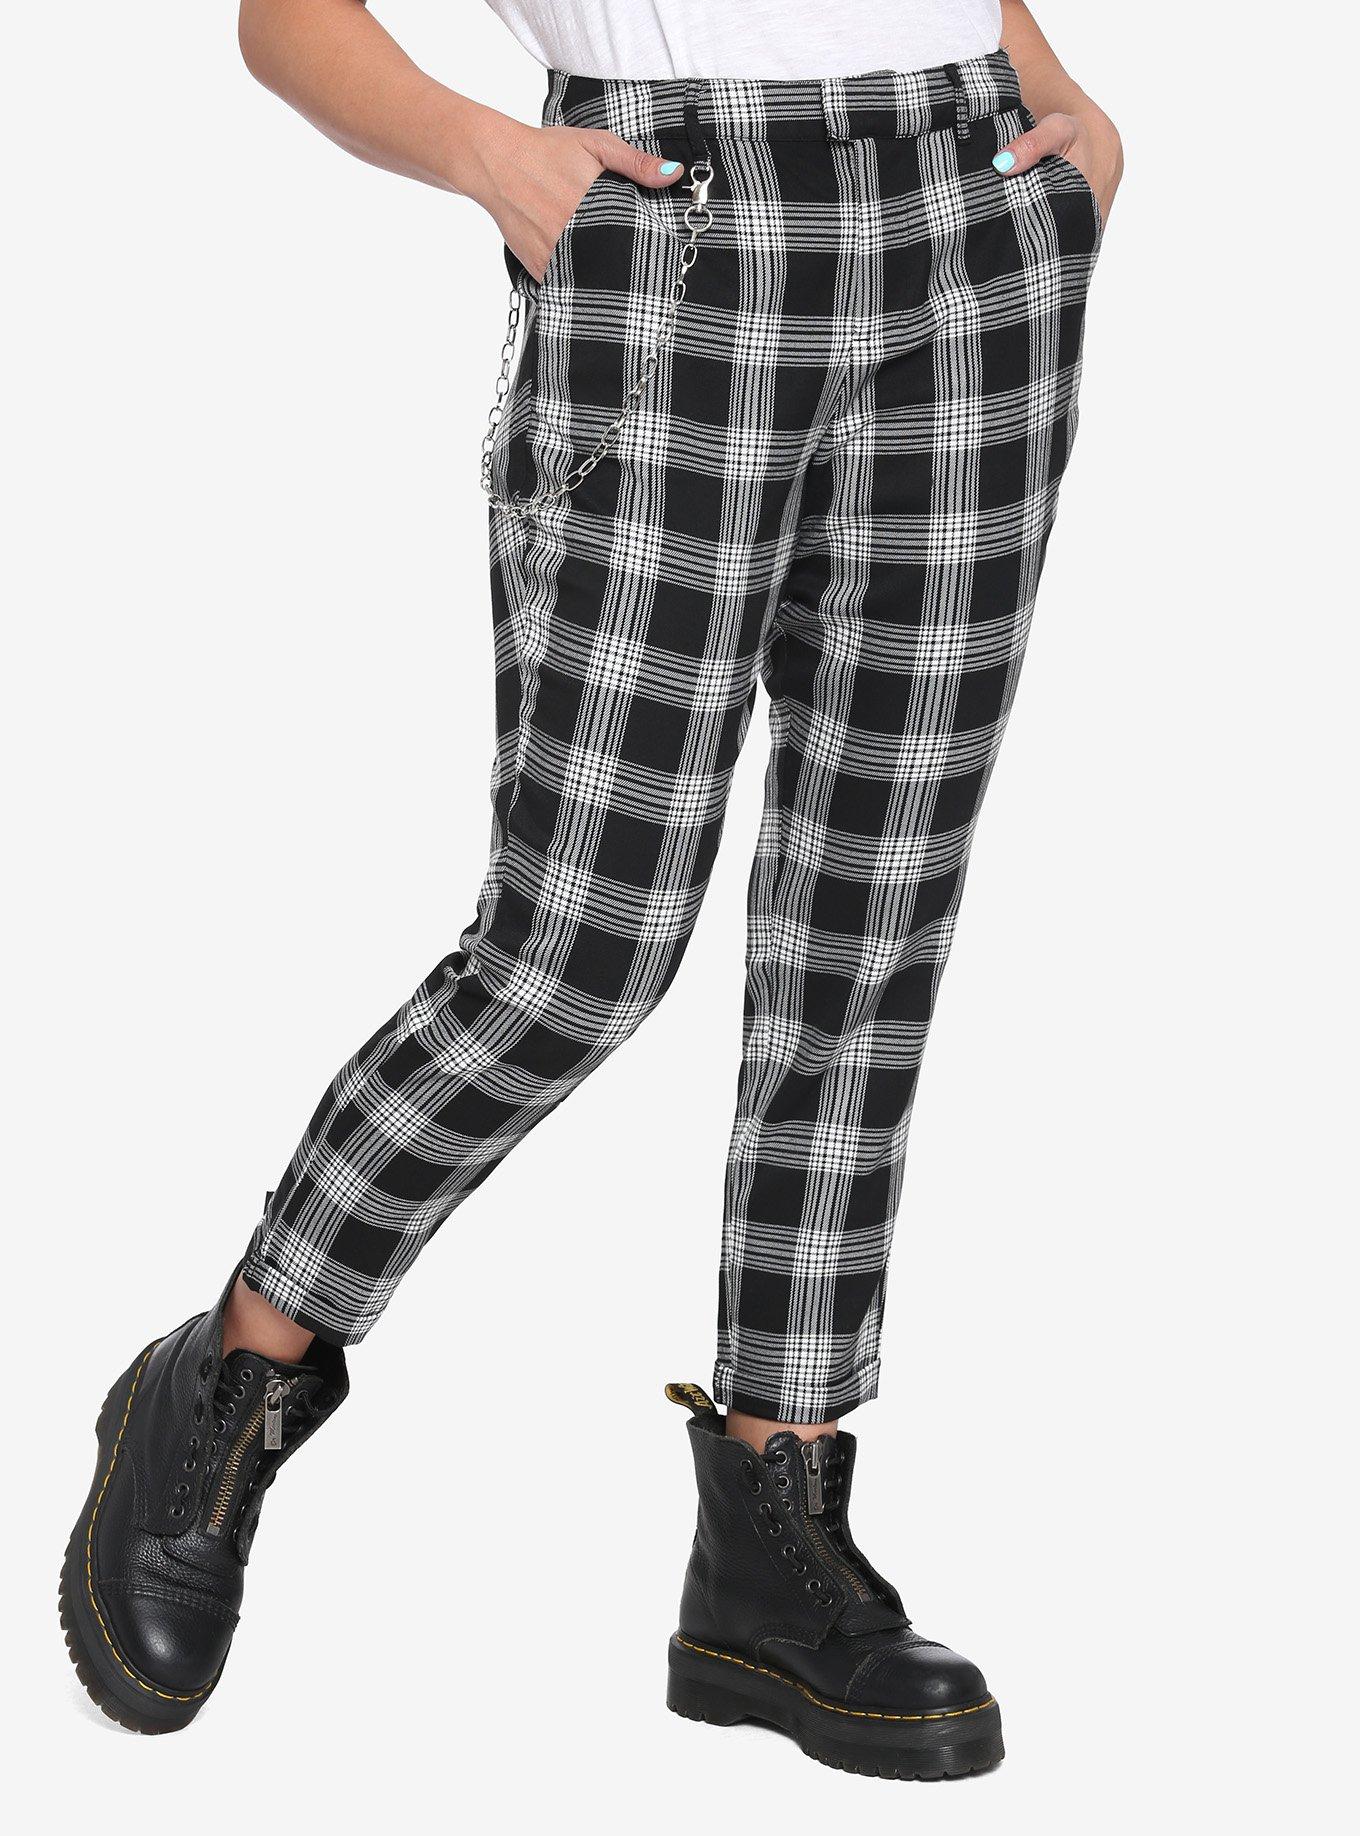 Hot Topic Women's punk red plaid pants with suspenders size 3